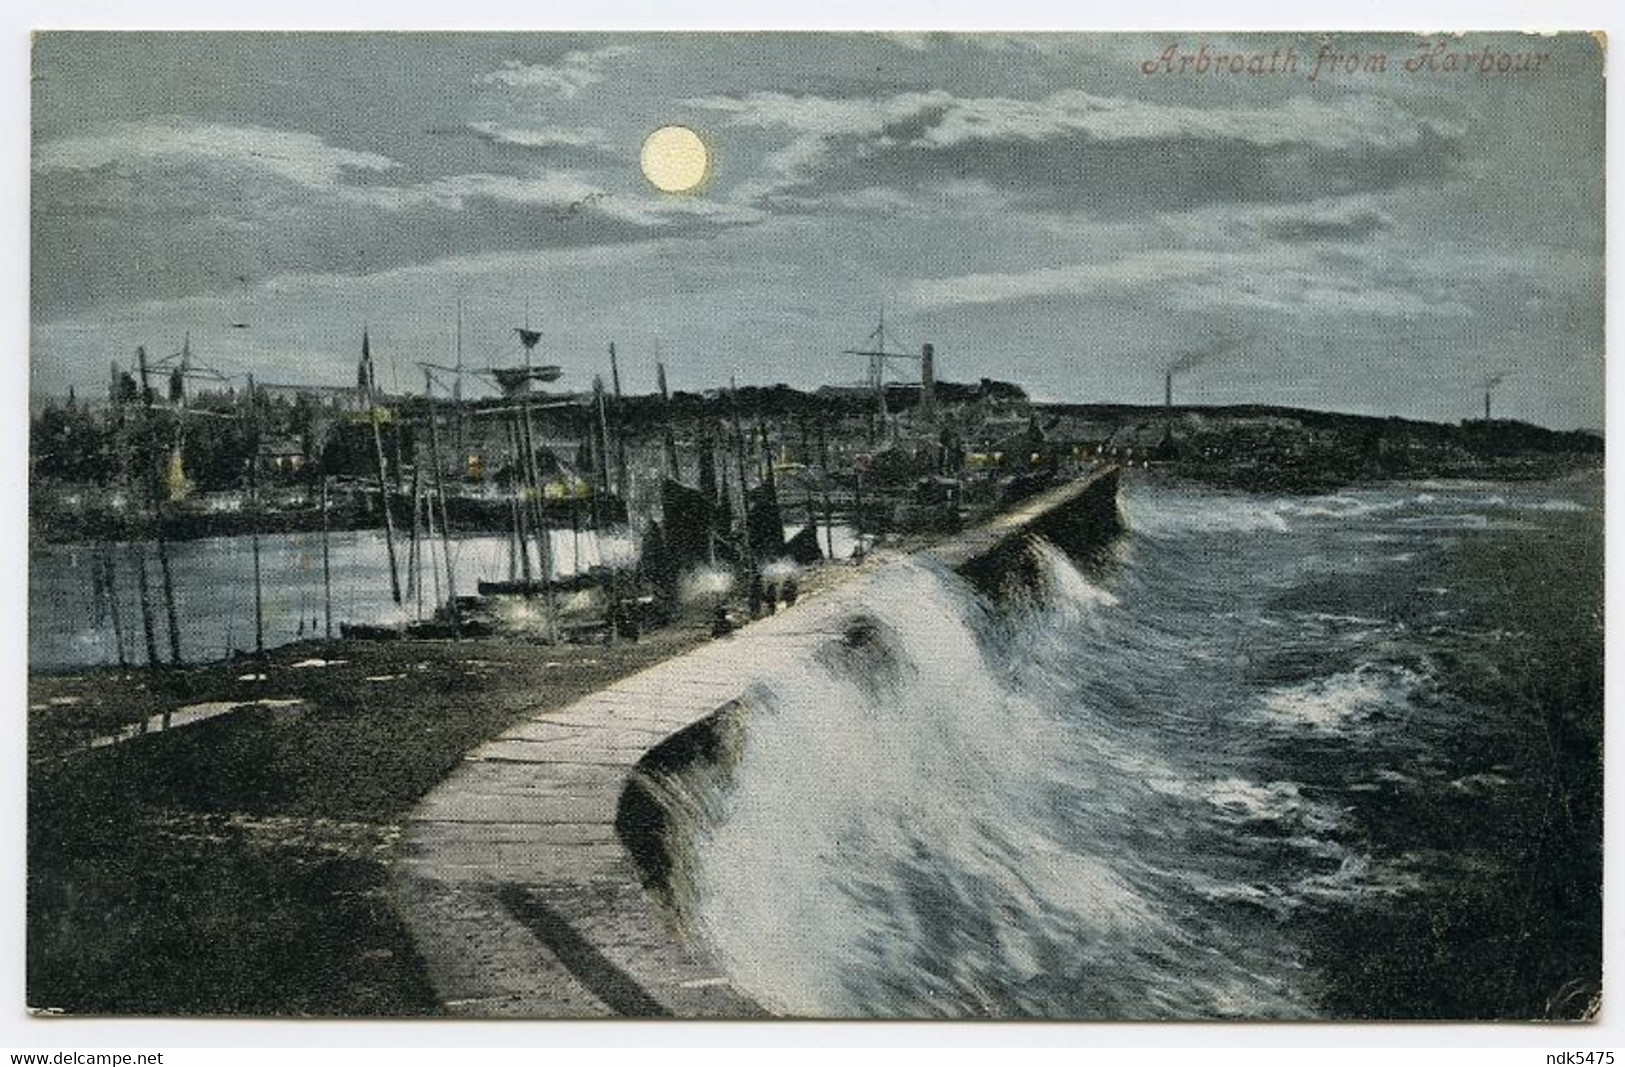 ARBROATH FROM HARBOUR (MOONLIGHT) / ADDRESS - BOURNEMOUTH, EAST CLIFF, CROMER, (GREGORY) - Angus